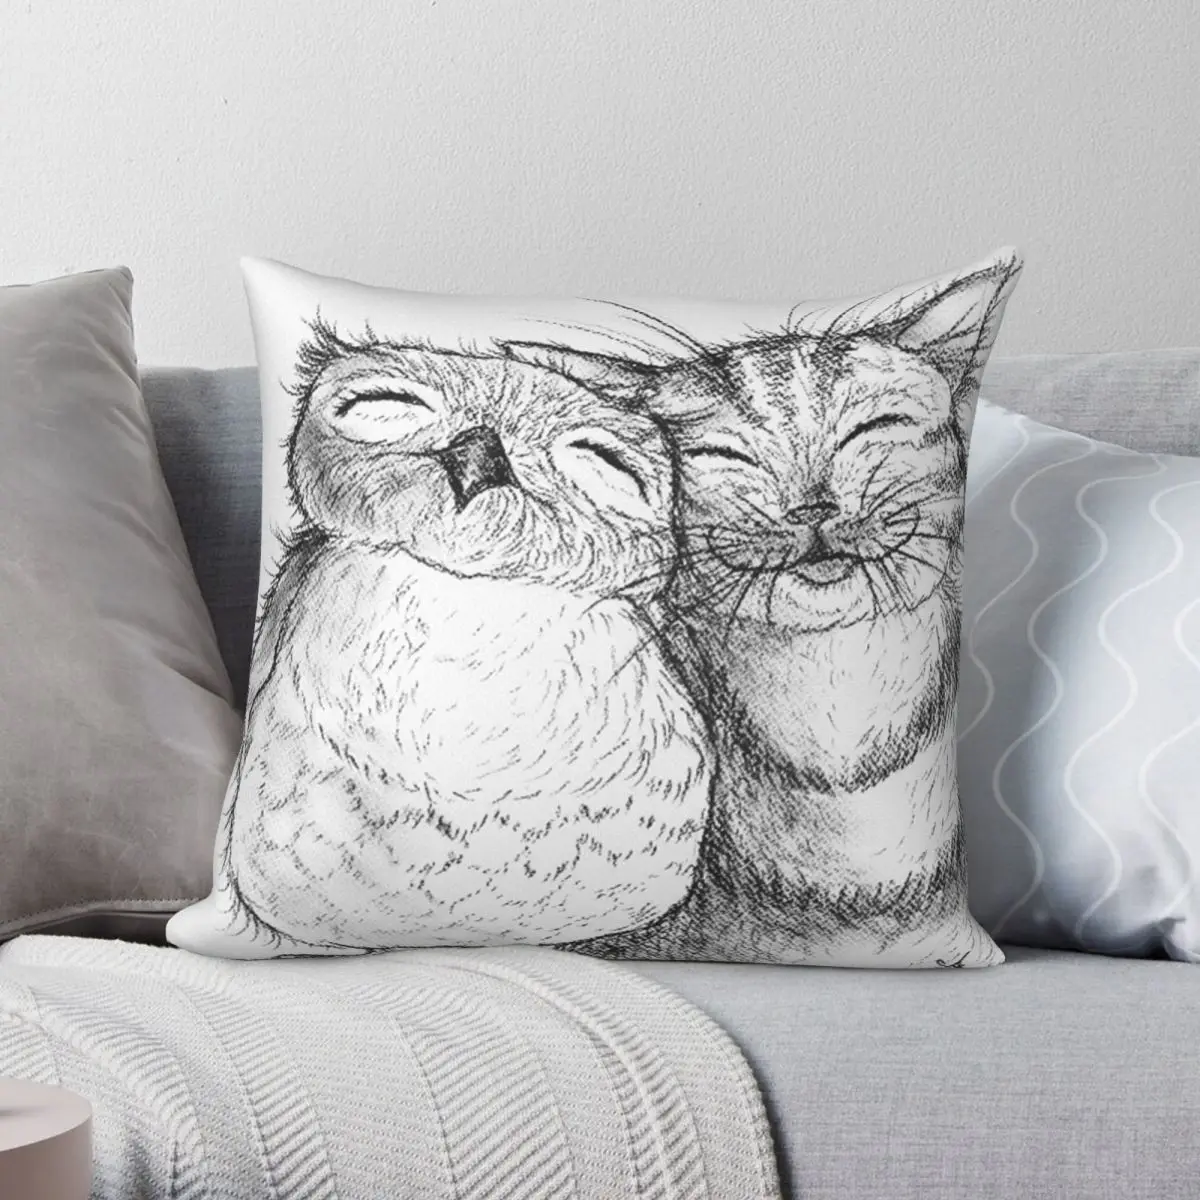 

The Owl And The Pussycat Pillowcase Polyester Linen Velvet Pattern Zip Decor Pillow Case Sofa Seater Cushion Cover 18"